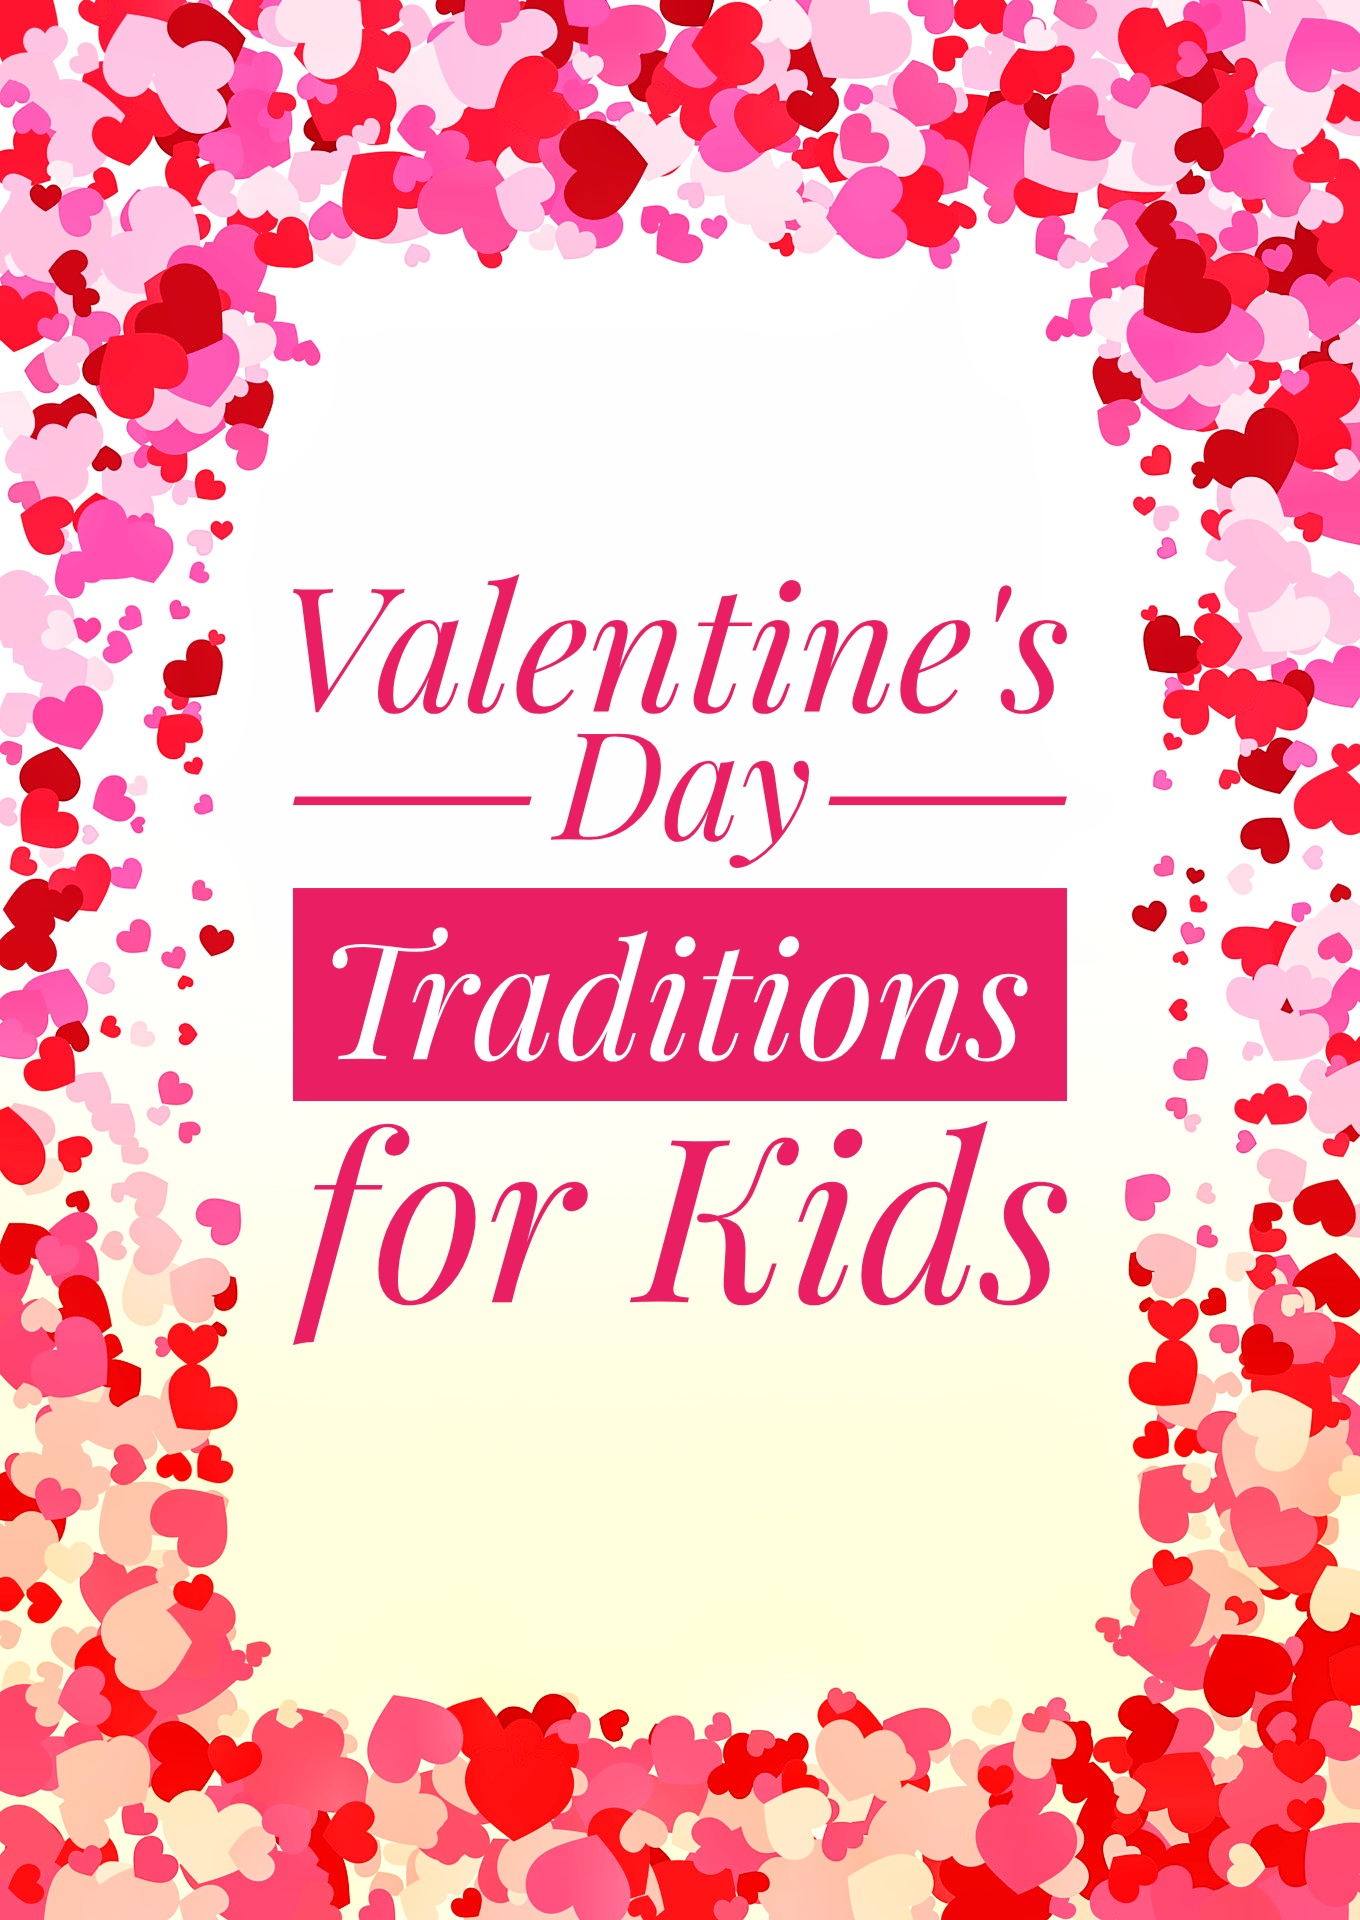 Valentines Day Traditions for Kids